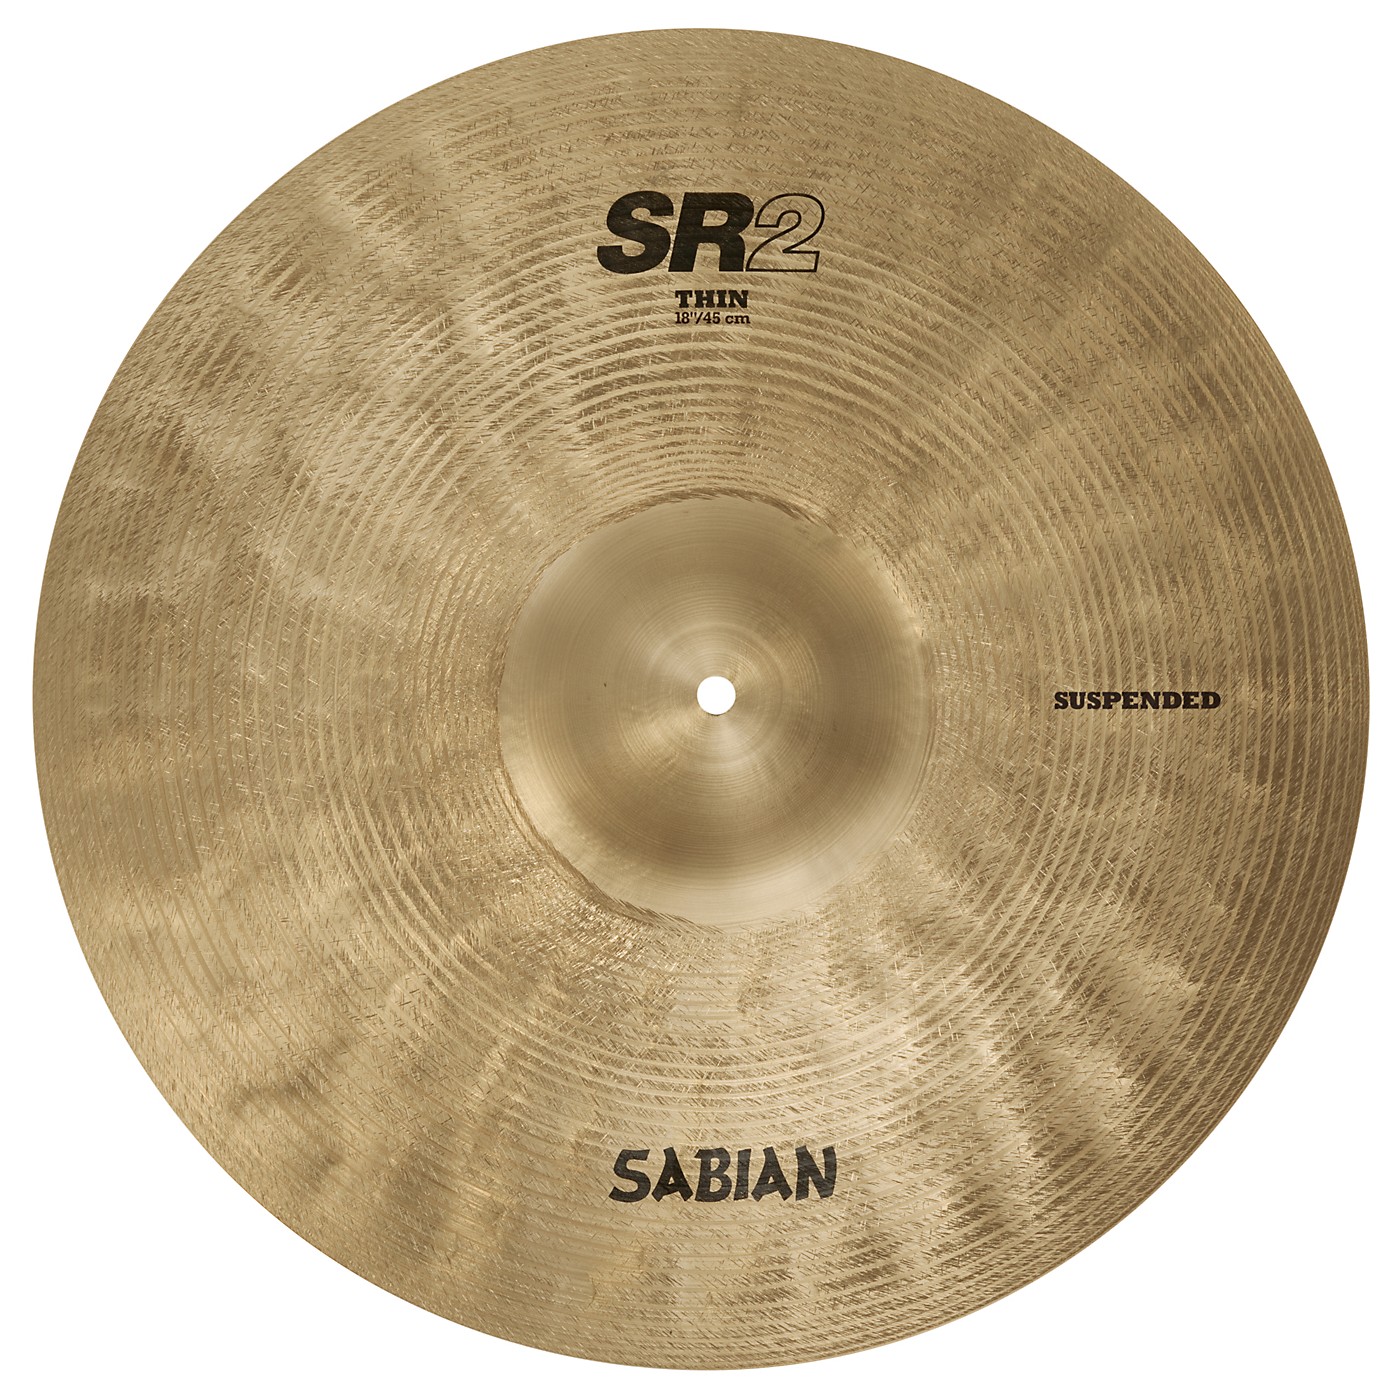 SABIAN SR2 Suspended Cymbal 18